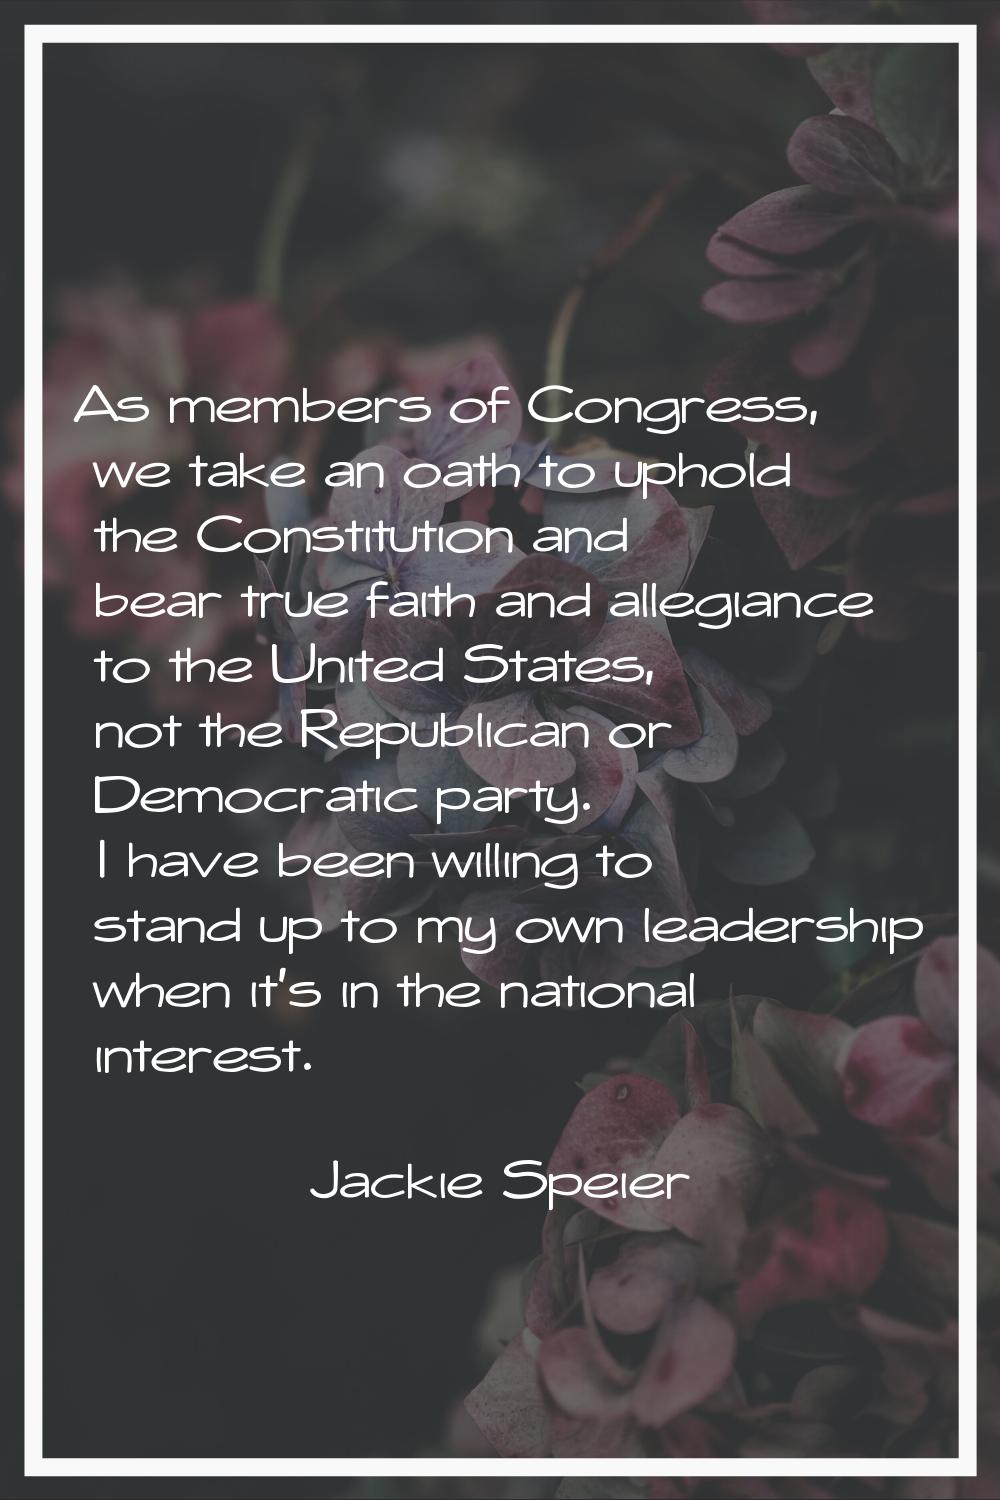 As members of Congress, we take an oath to uphold the Constitution and bear true faith and allegian